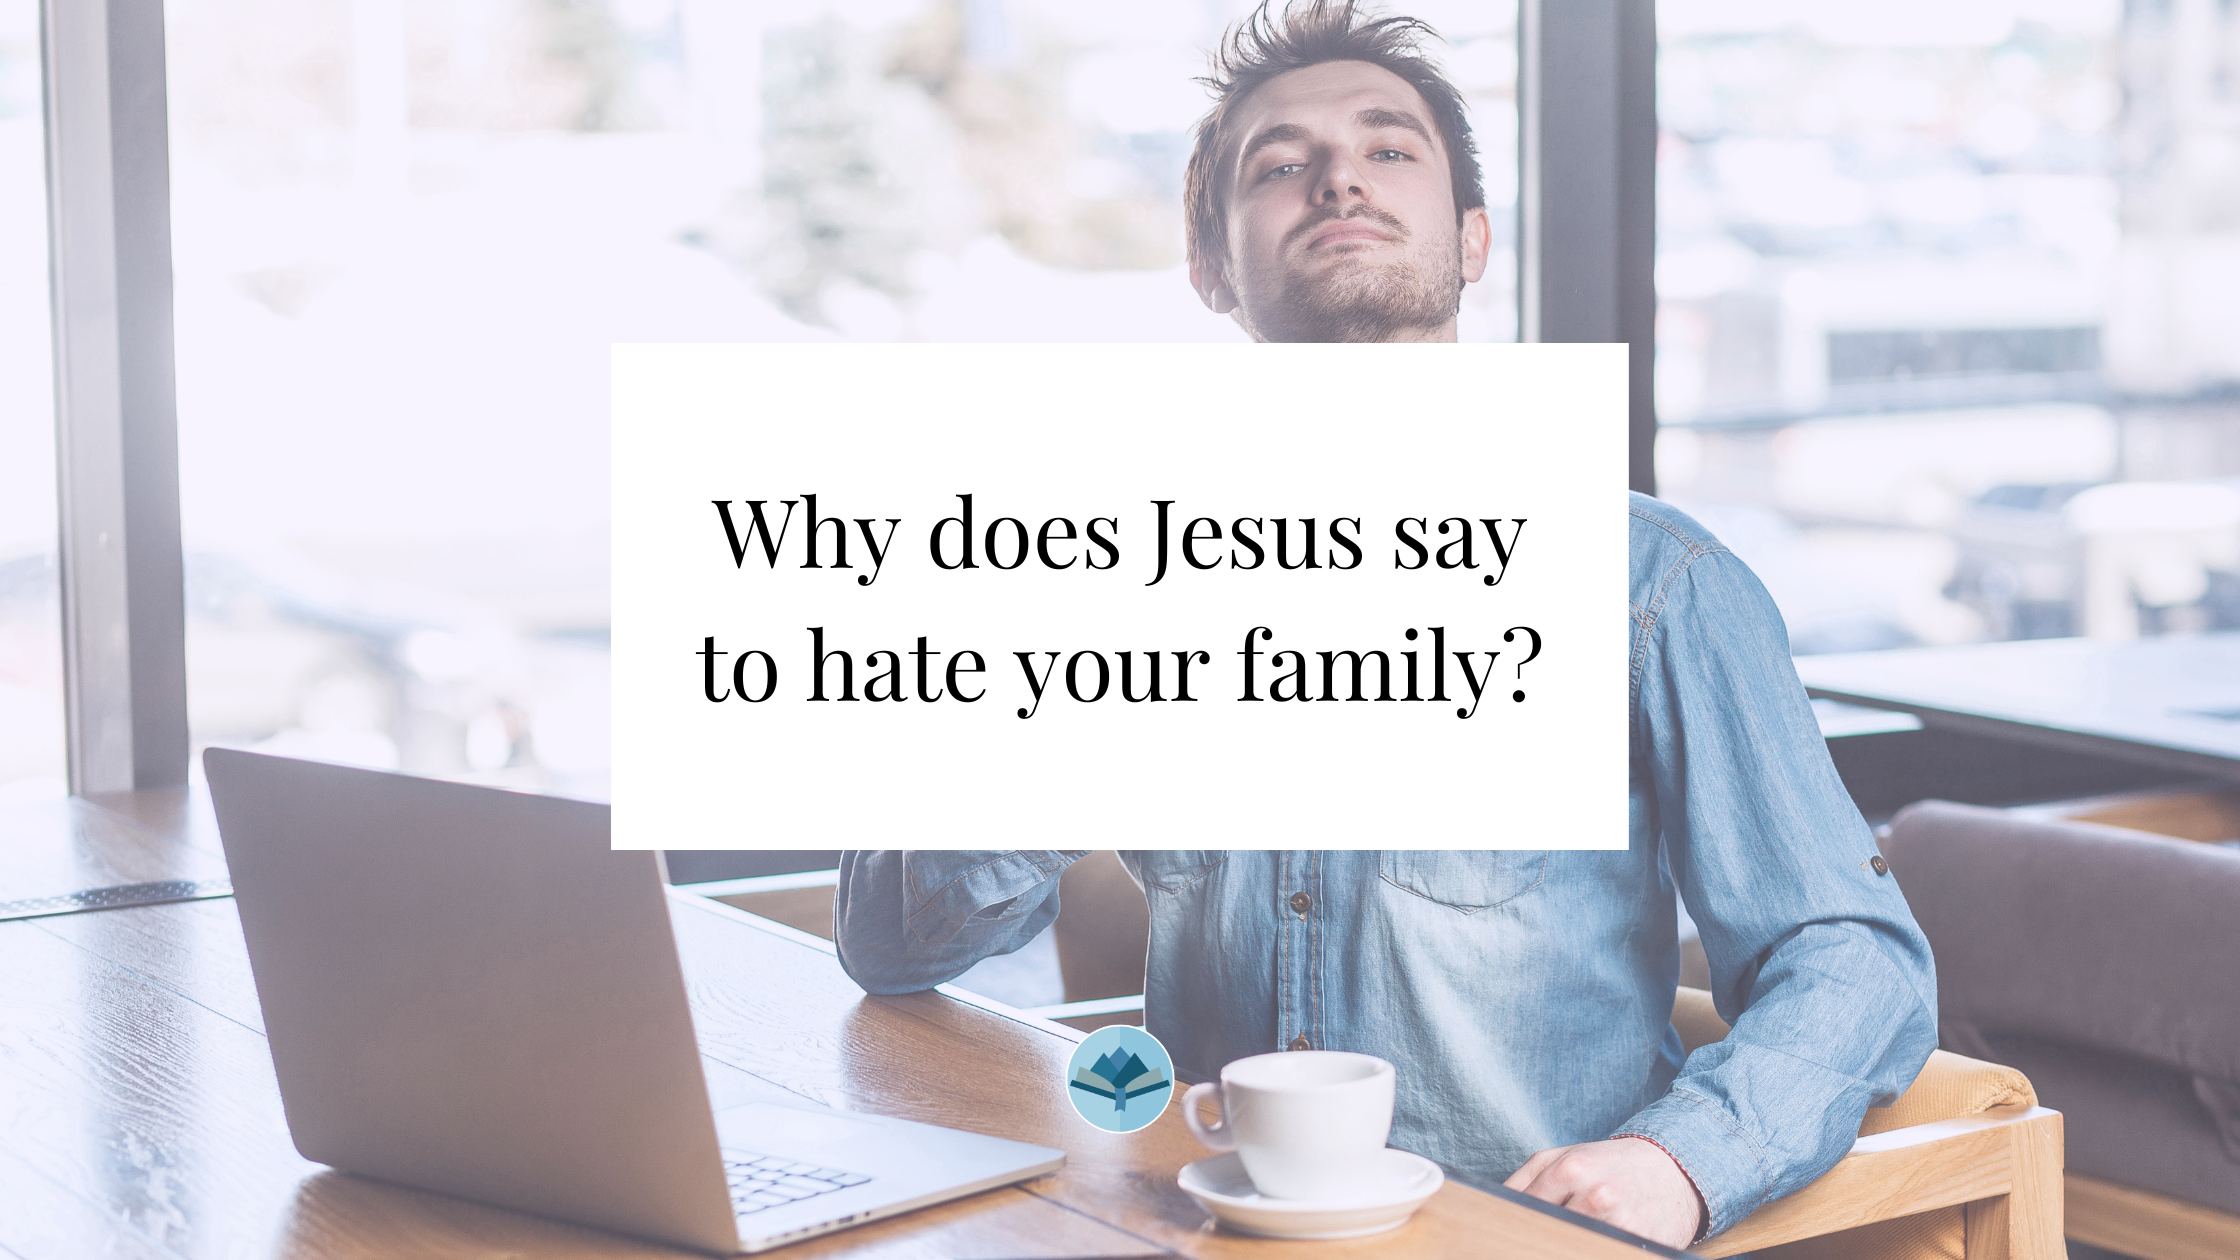 Why does Jesus say to hate your family